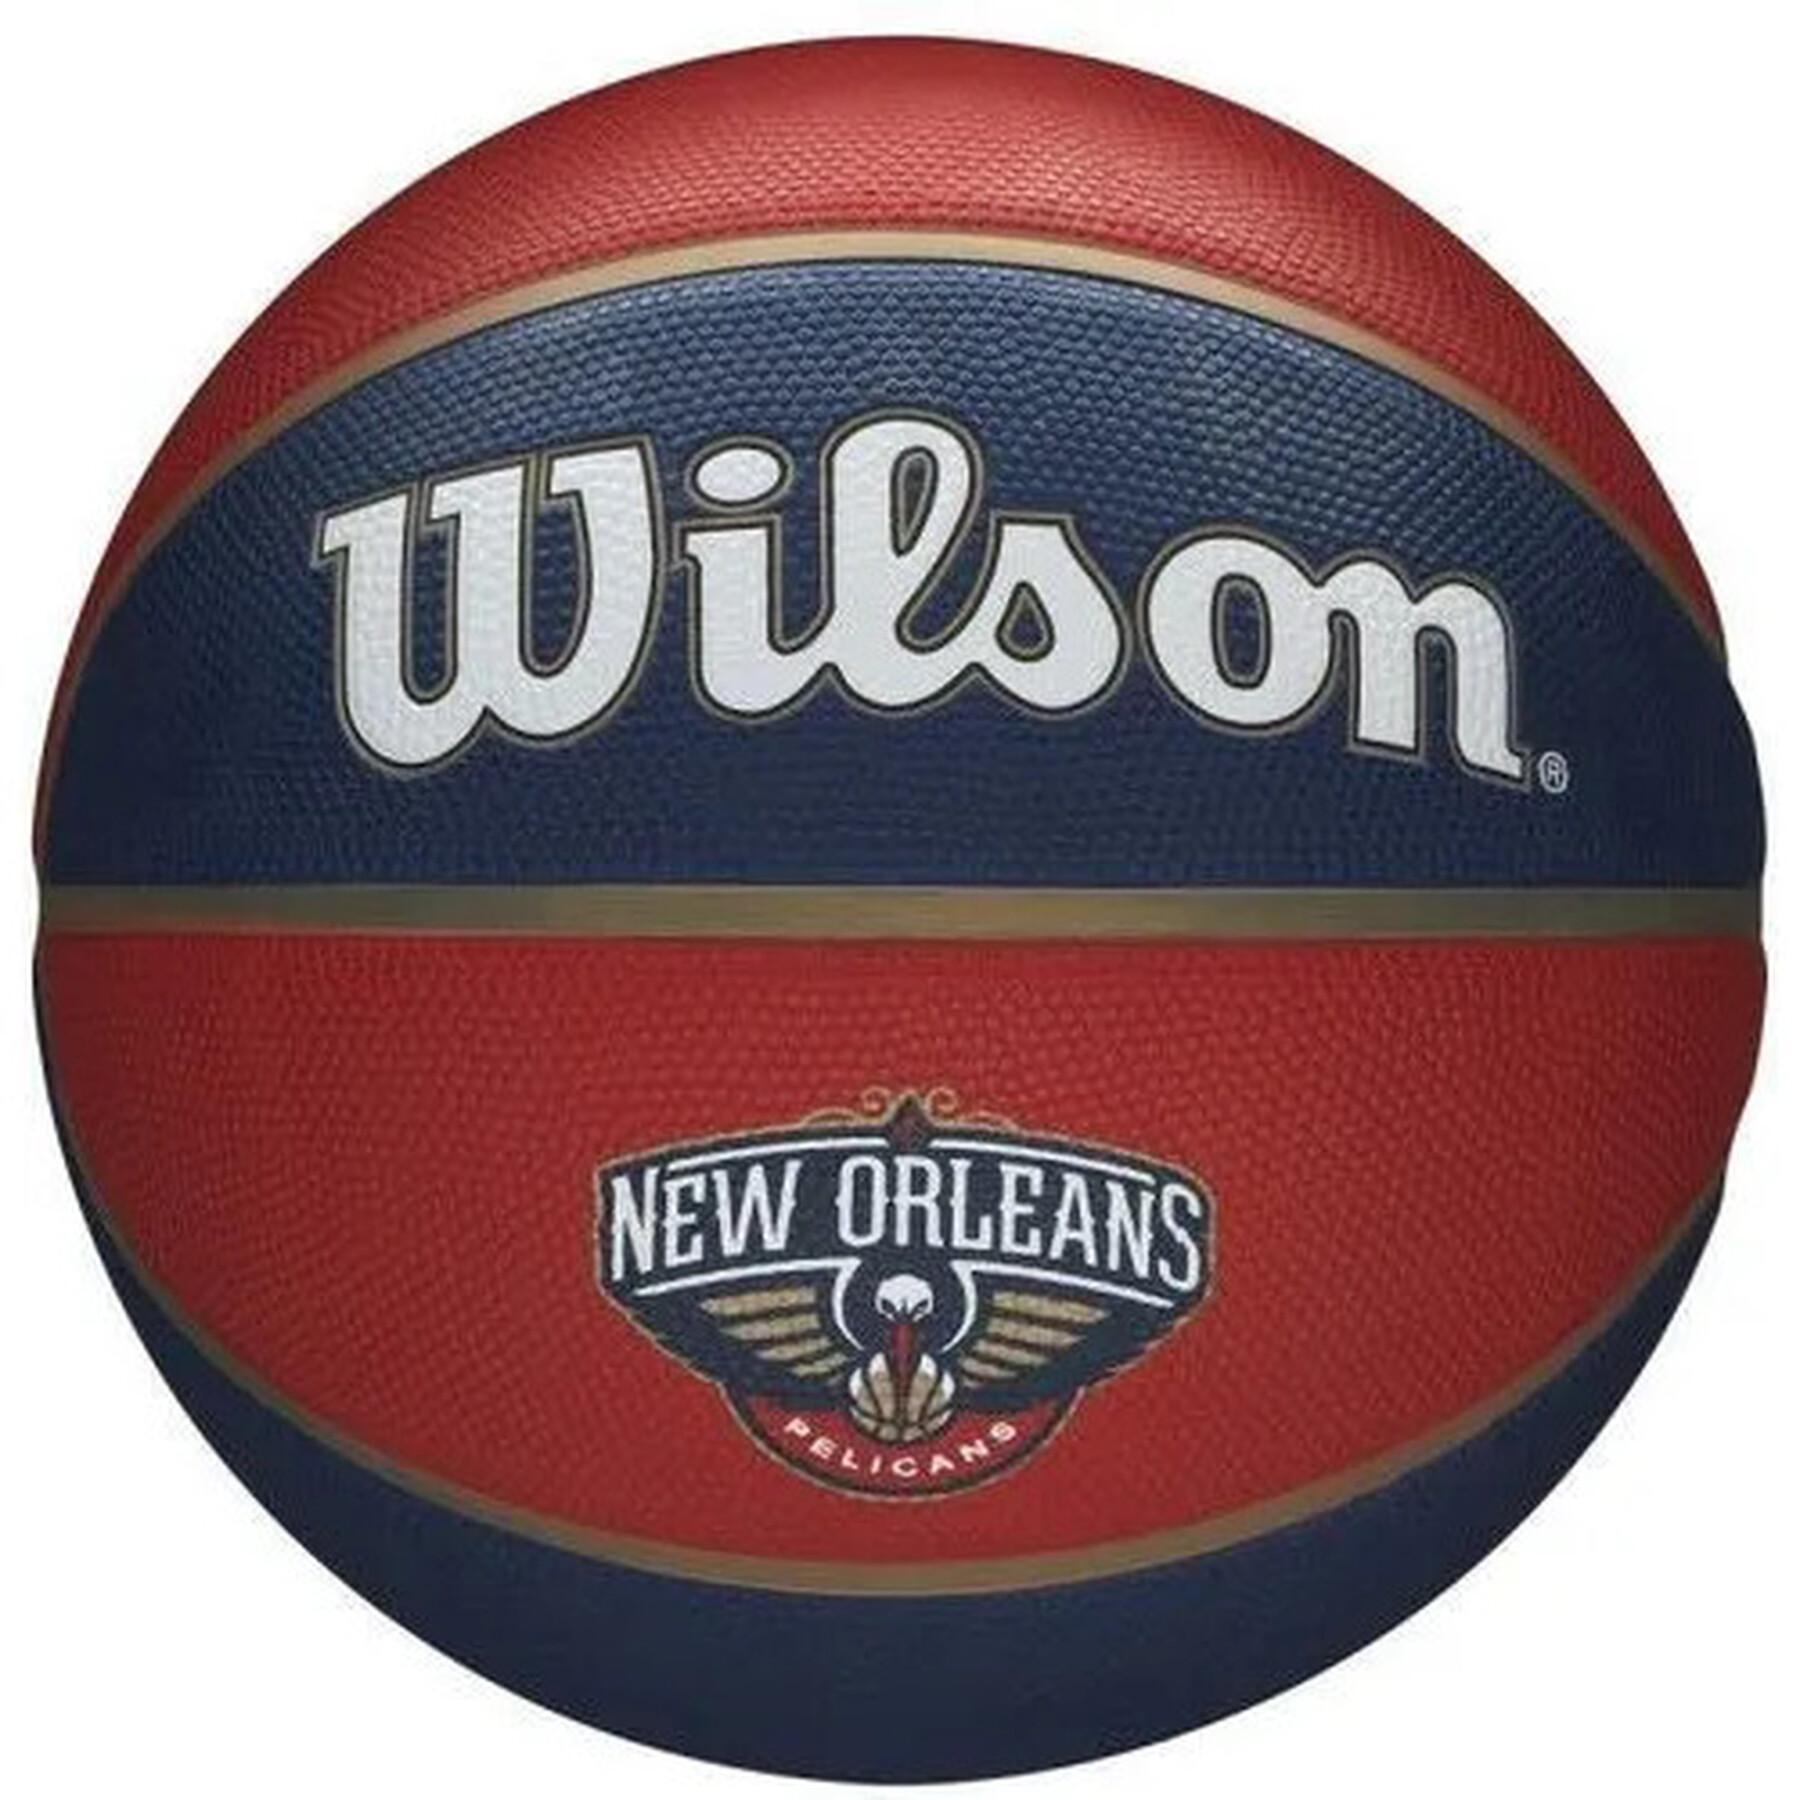 Bola NBA tribote New Orleans Pelicans